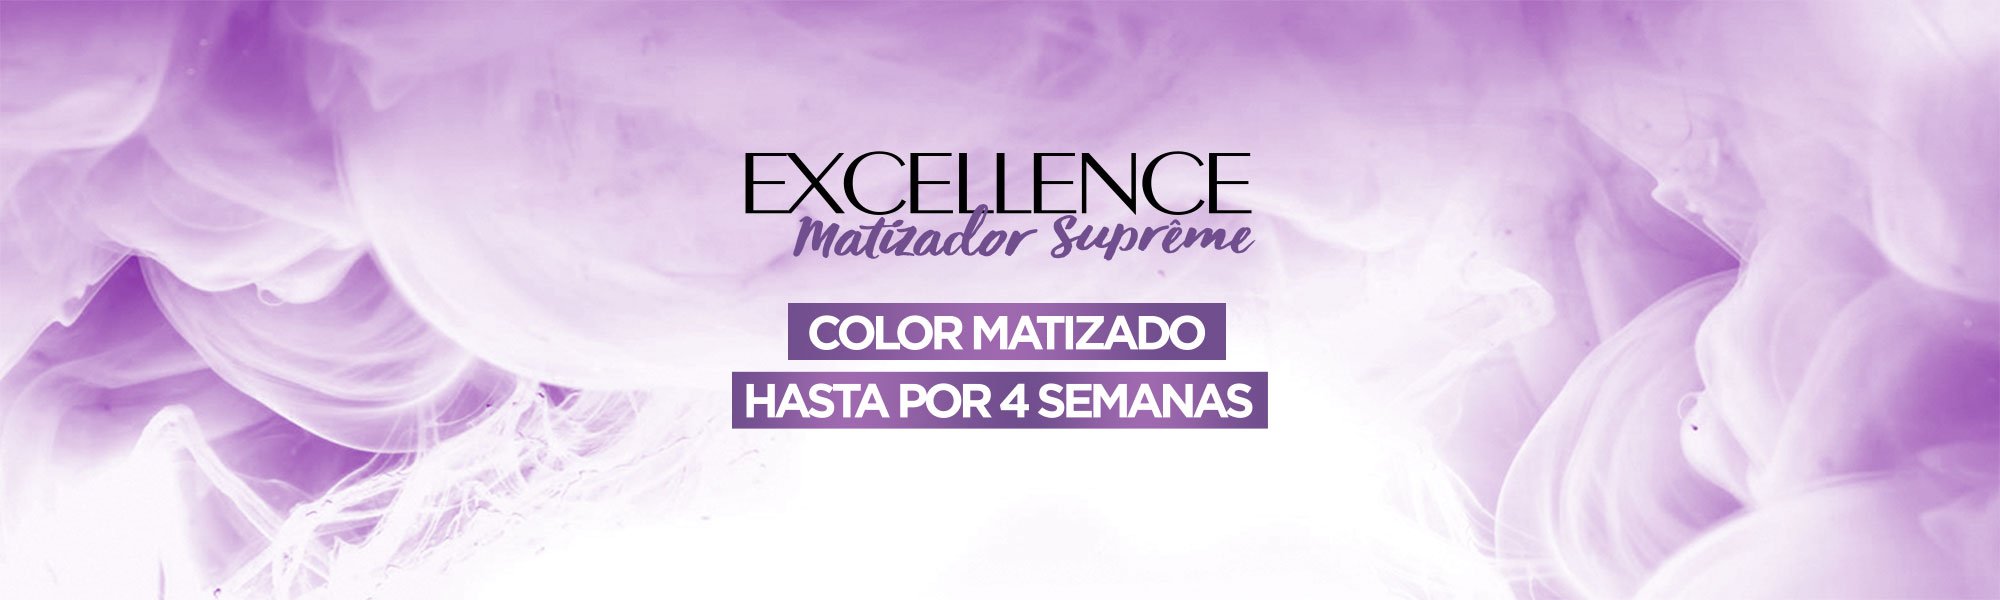 11203118 2 LOREAL Banners Para Web Excellence CCG Magic Retouch